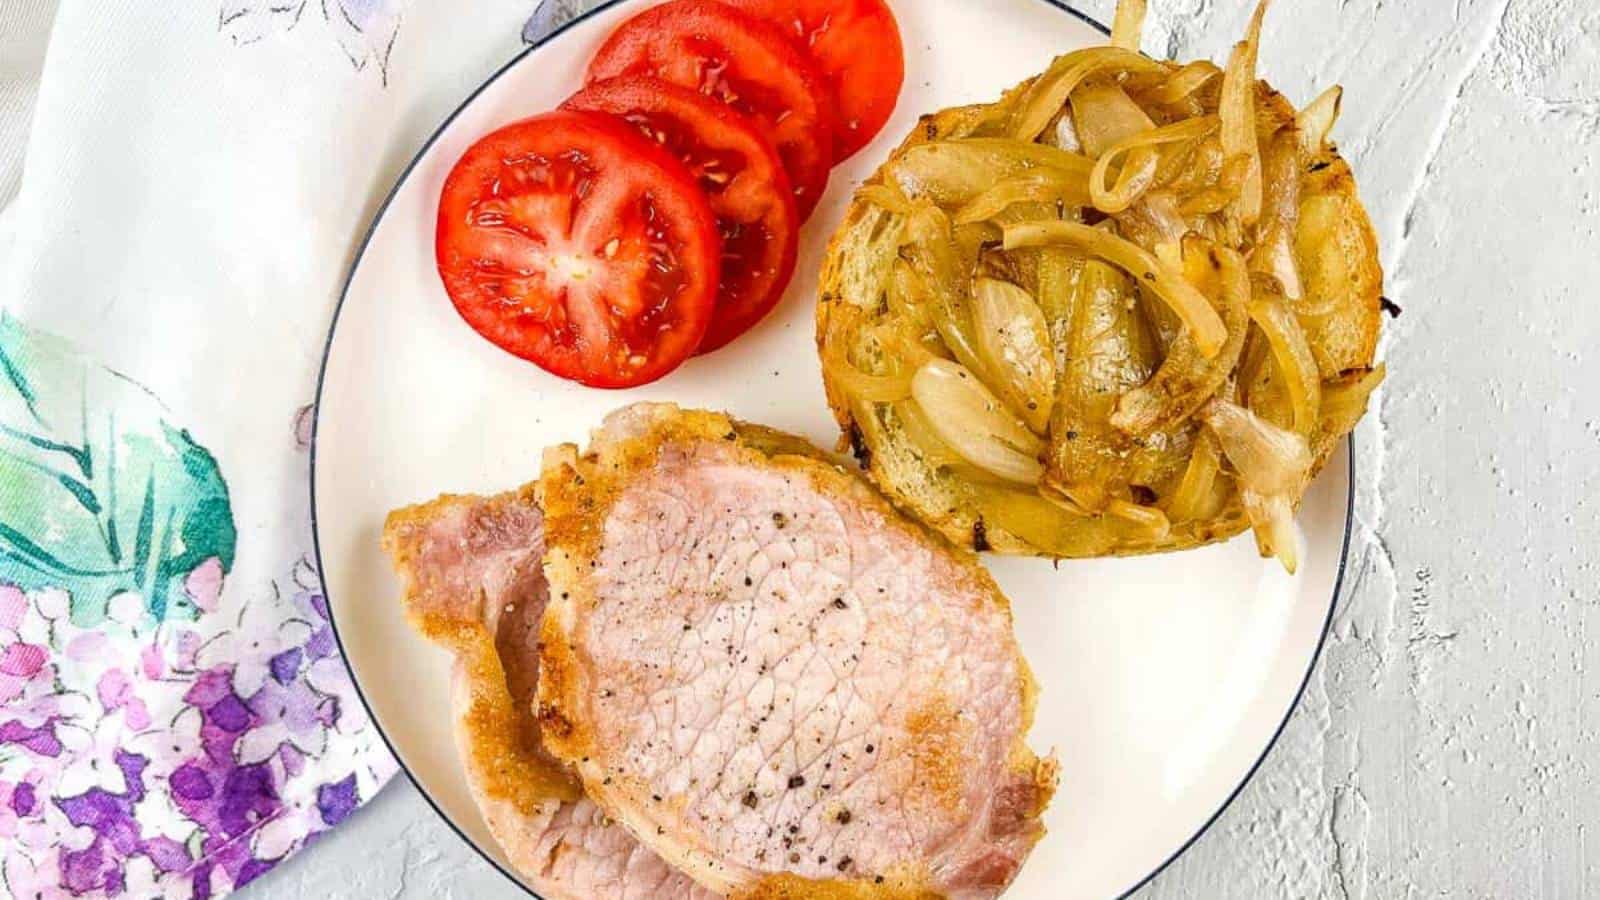 Peameal bacon on a plate with tomatoes and onions.